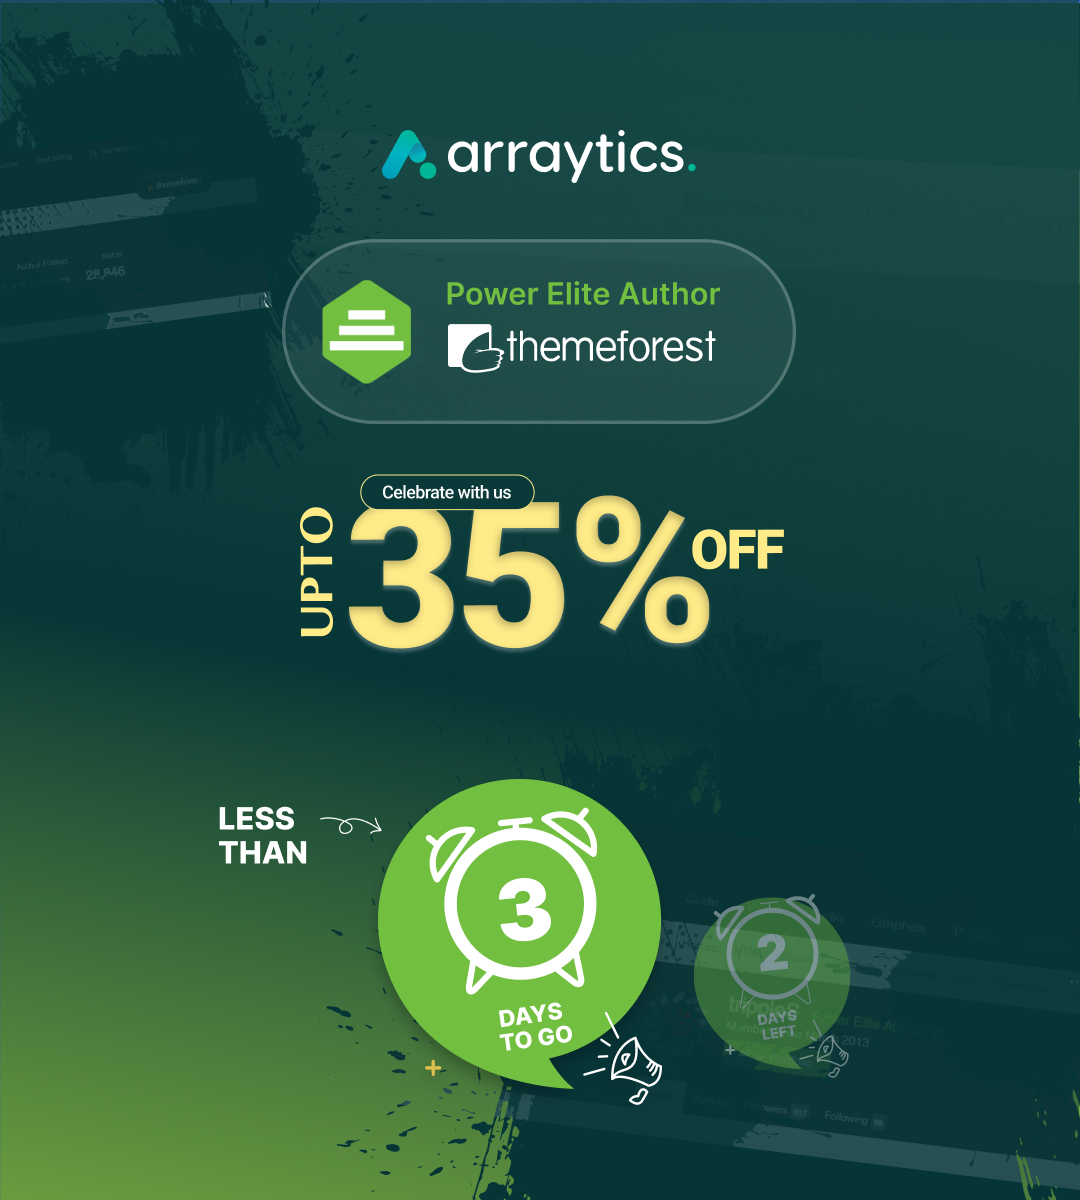 📢Arraytics’ Power-Elite Campaign Ending in 3 Days ⏰

Time is running out!

Hurry up, grab the deal, and celebrate with us by getting enormous discounts!!

Get the #Arraytics #PowerElite_deal now 👇
arraytics.com/deals/